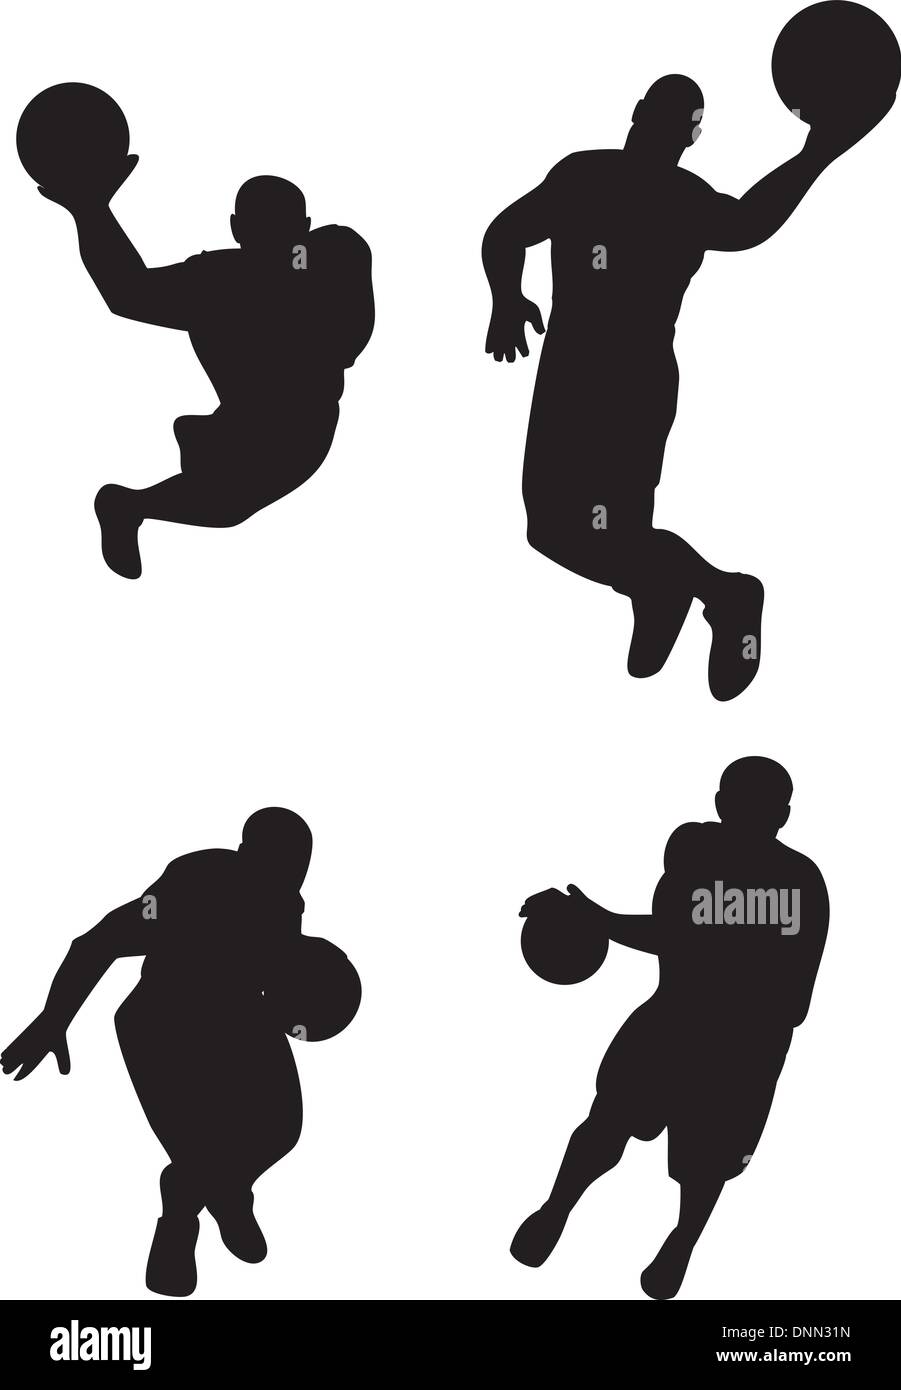 Illustration of a basketball player done in retro style. Stock Vector